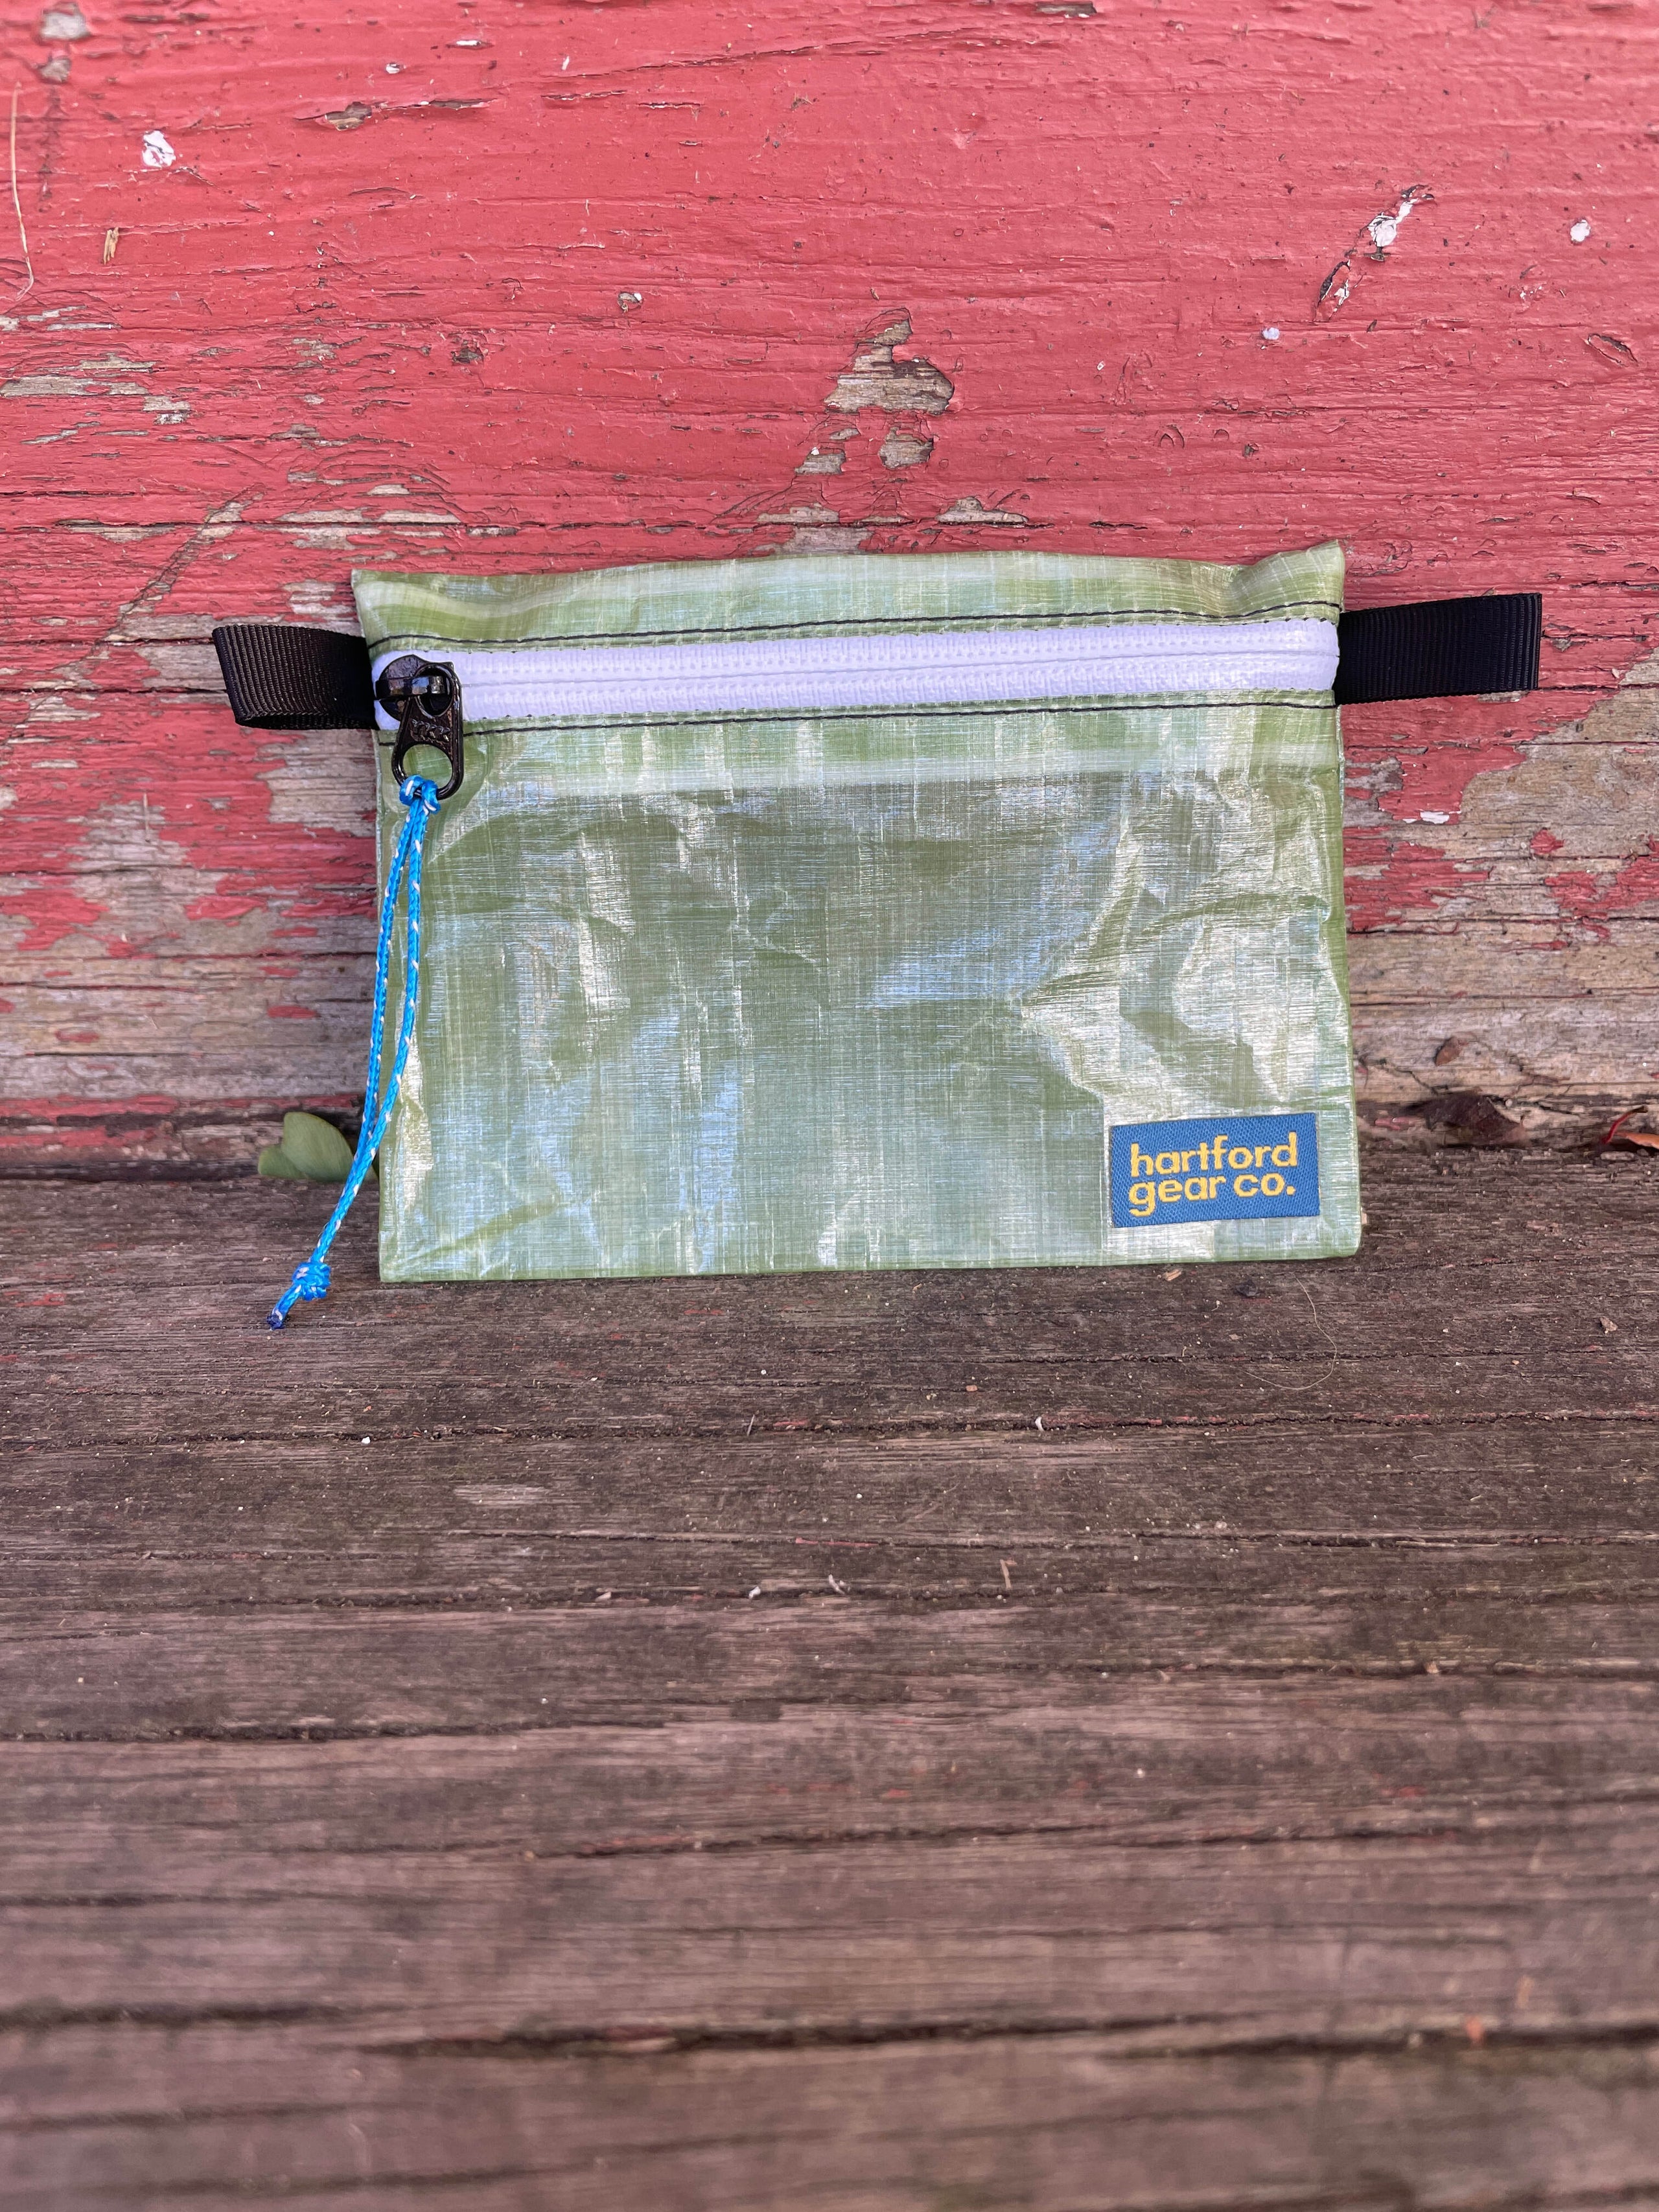 Zipper Pouch Kit with Dyneema® Composite Fabric